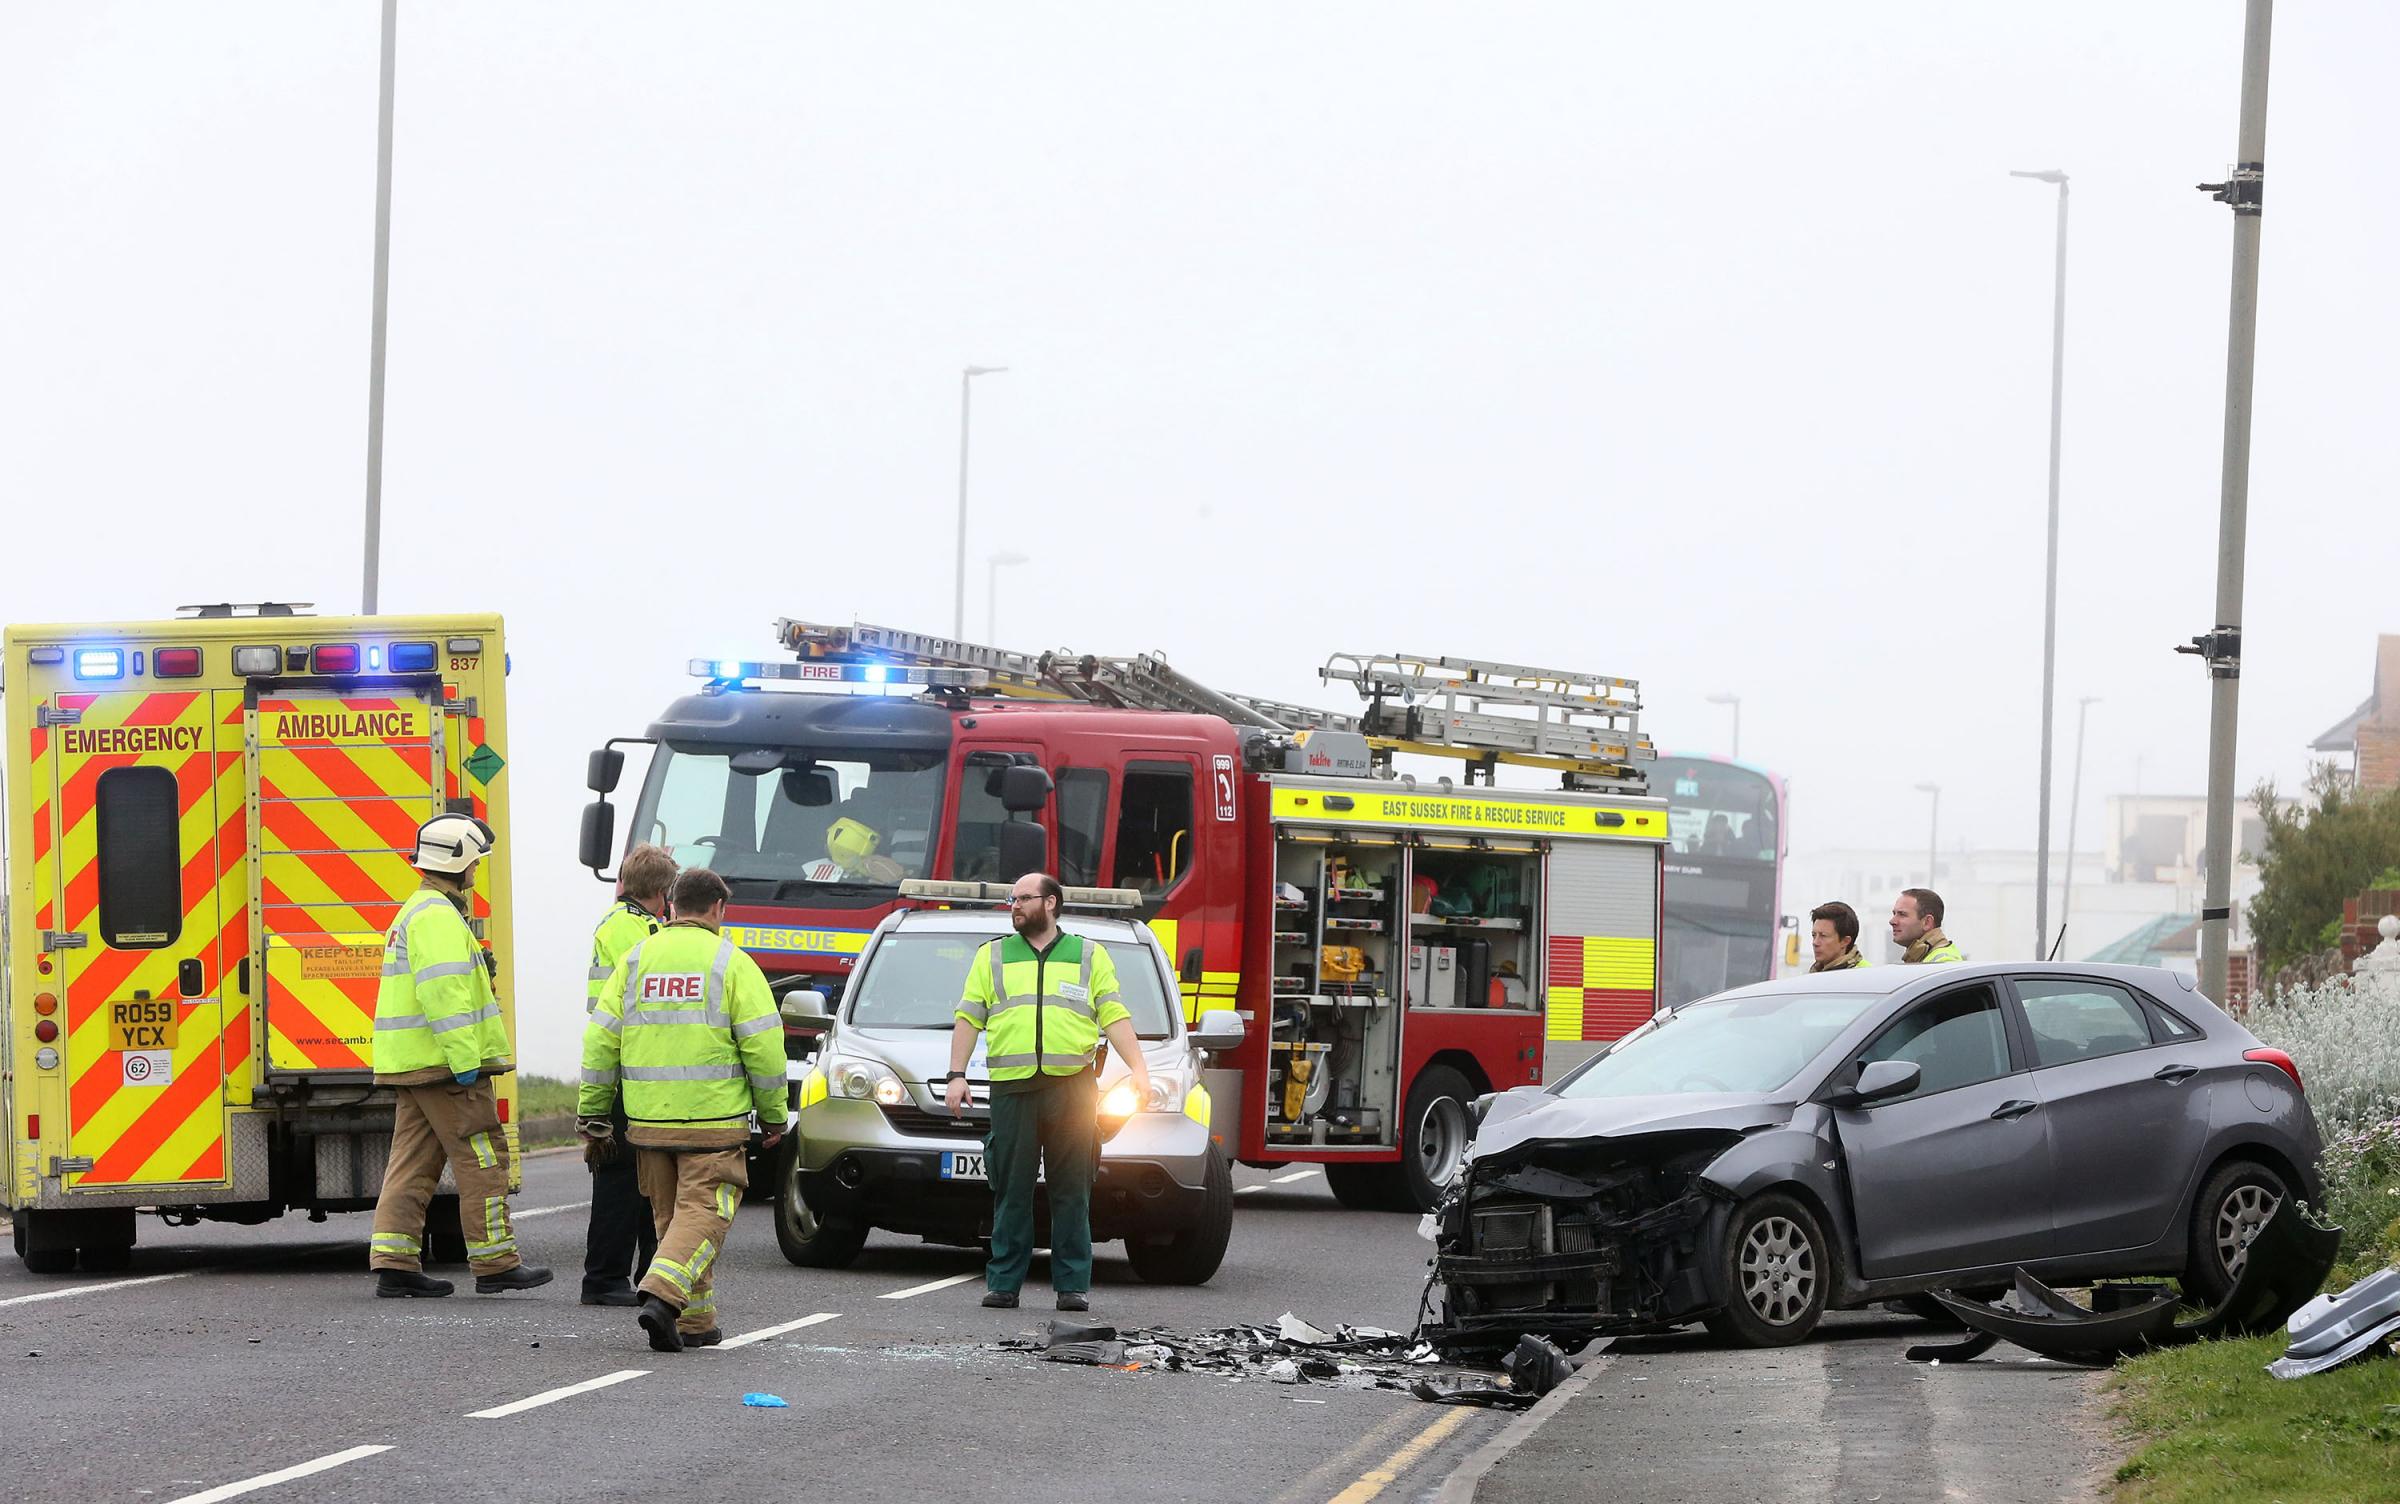 Drivers walk away from serious head-on collision on South Coast Road